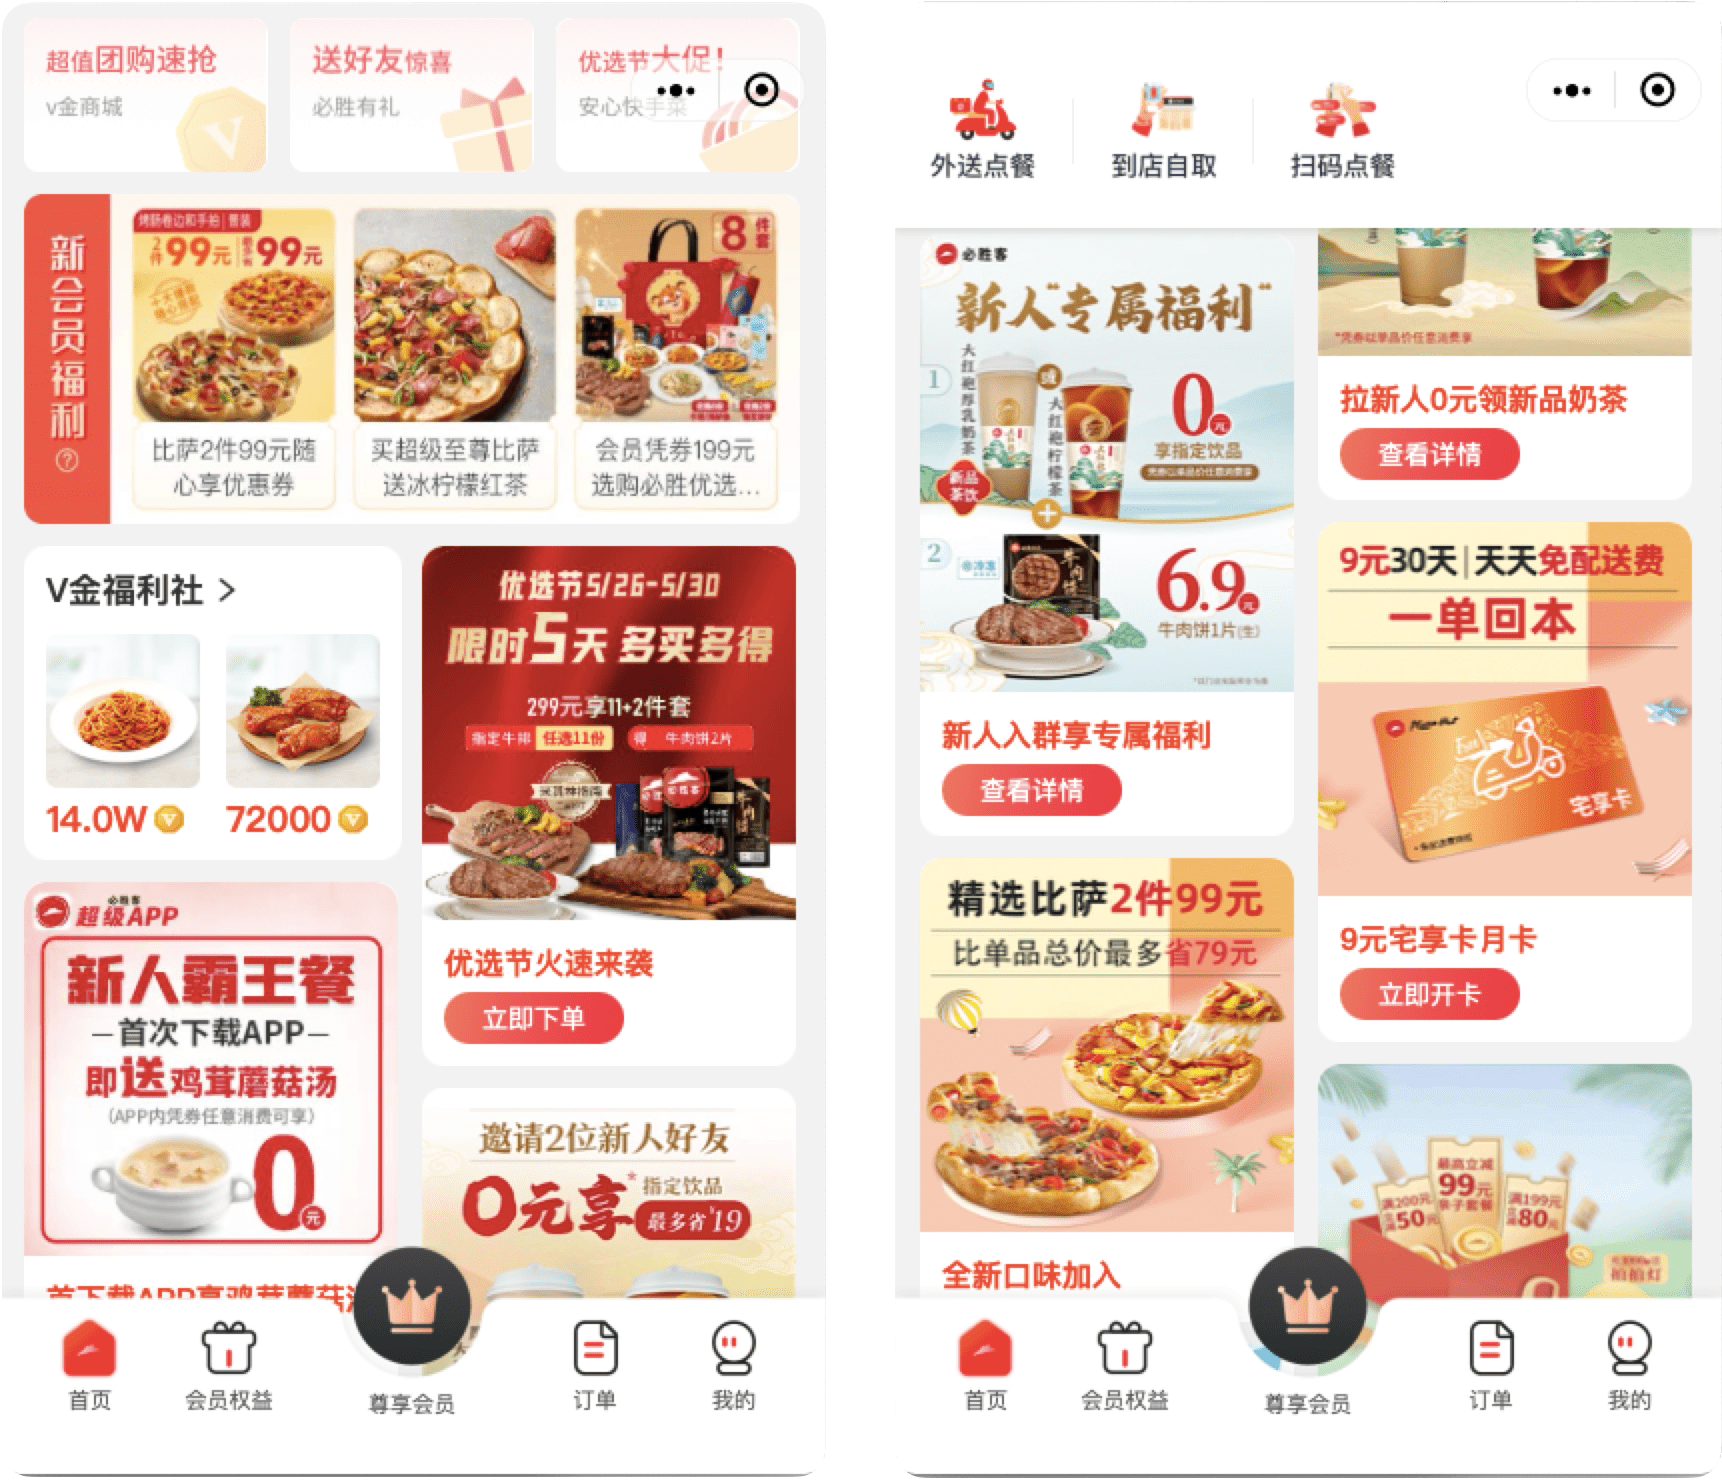 The WeChat Mini Program gives customers a menu tailored to their personal taste with personalized promotions